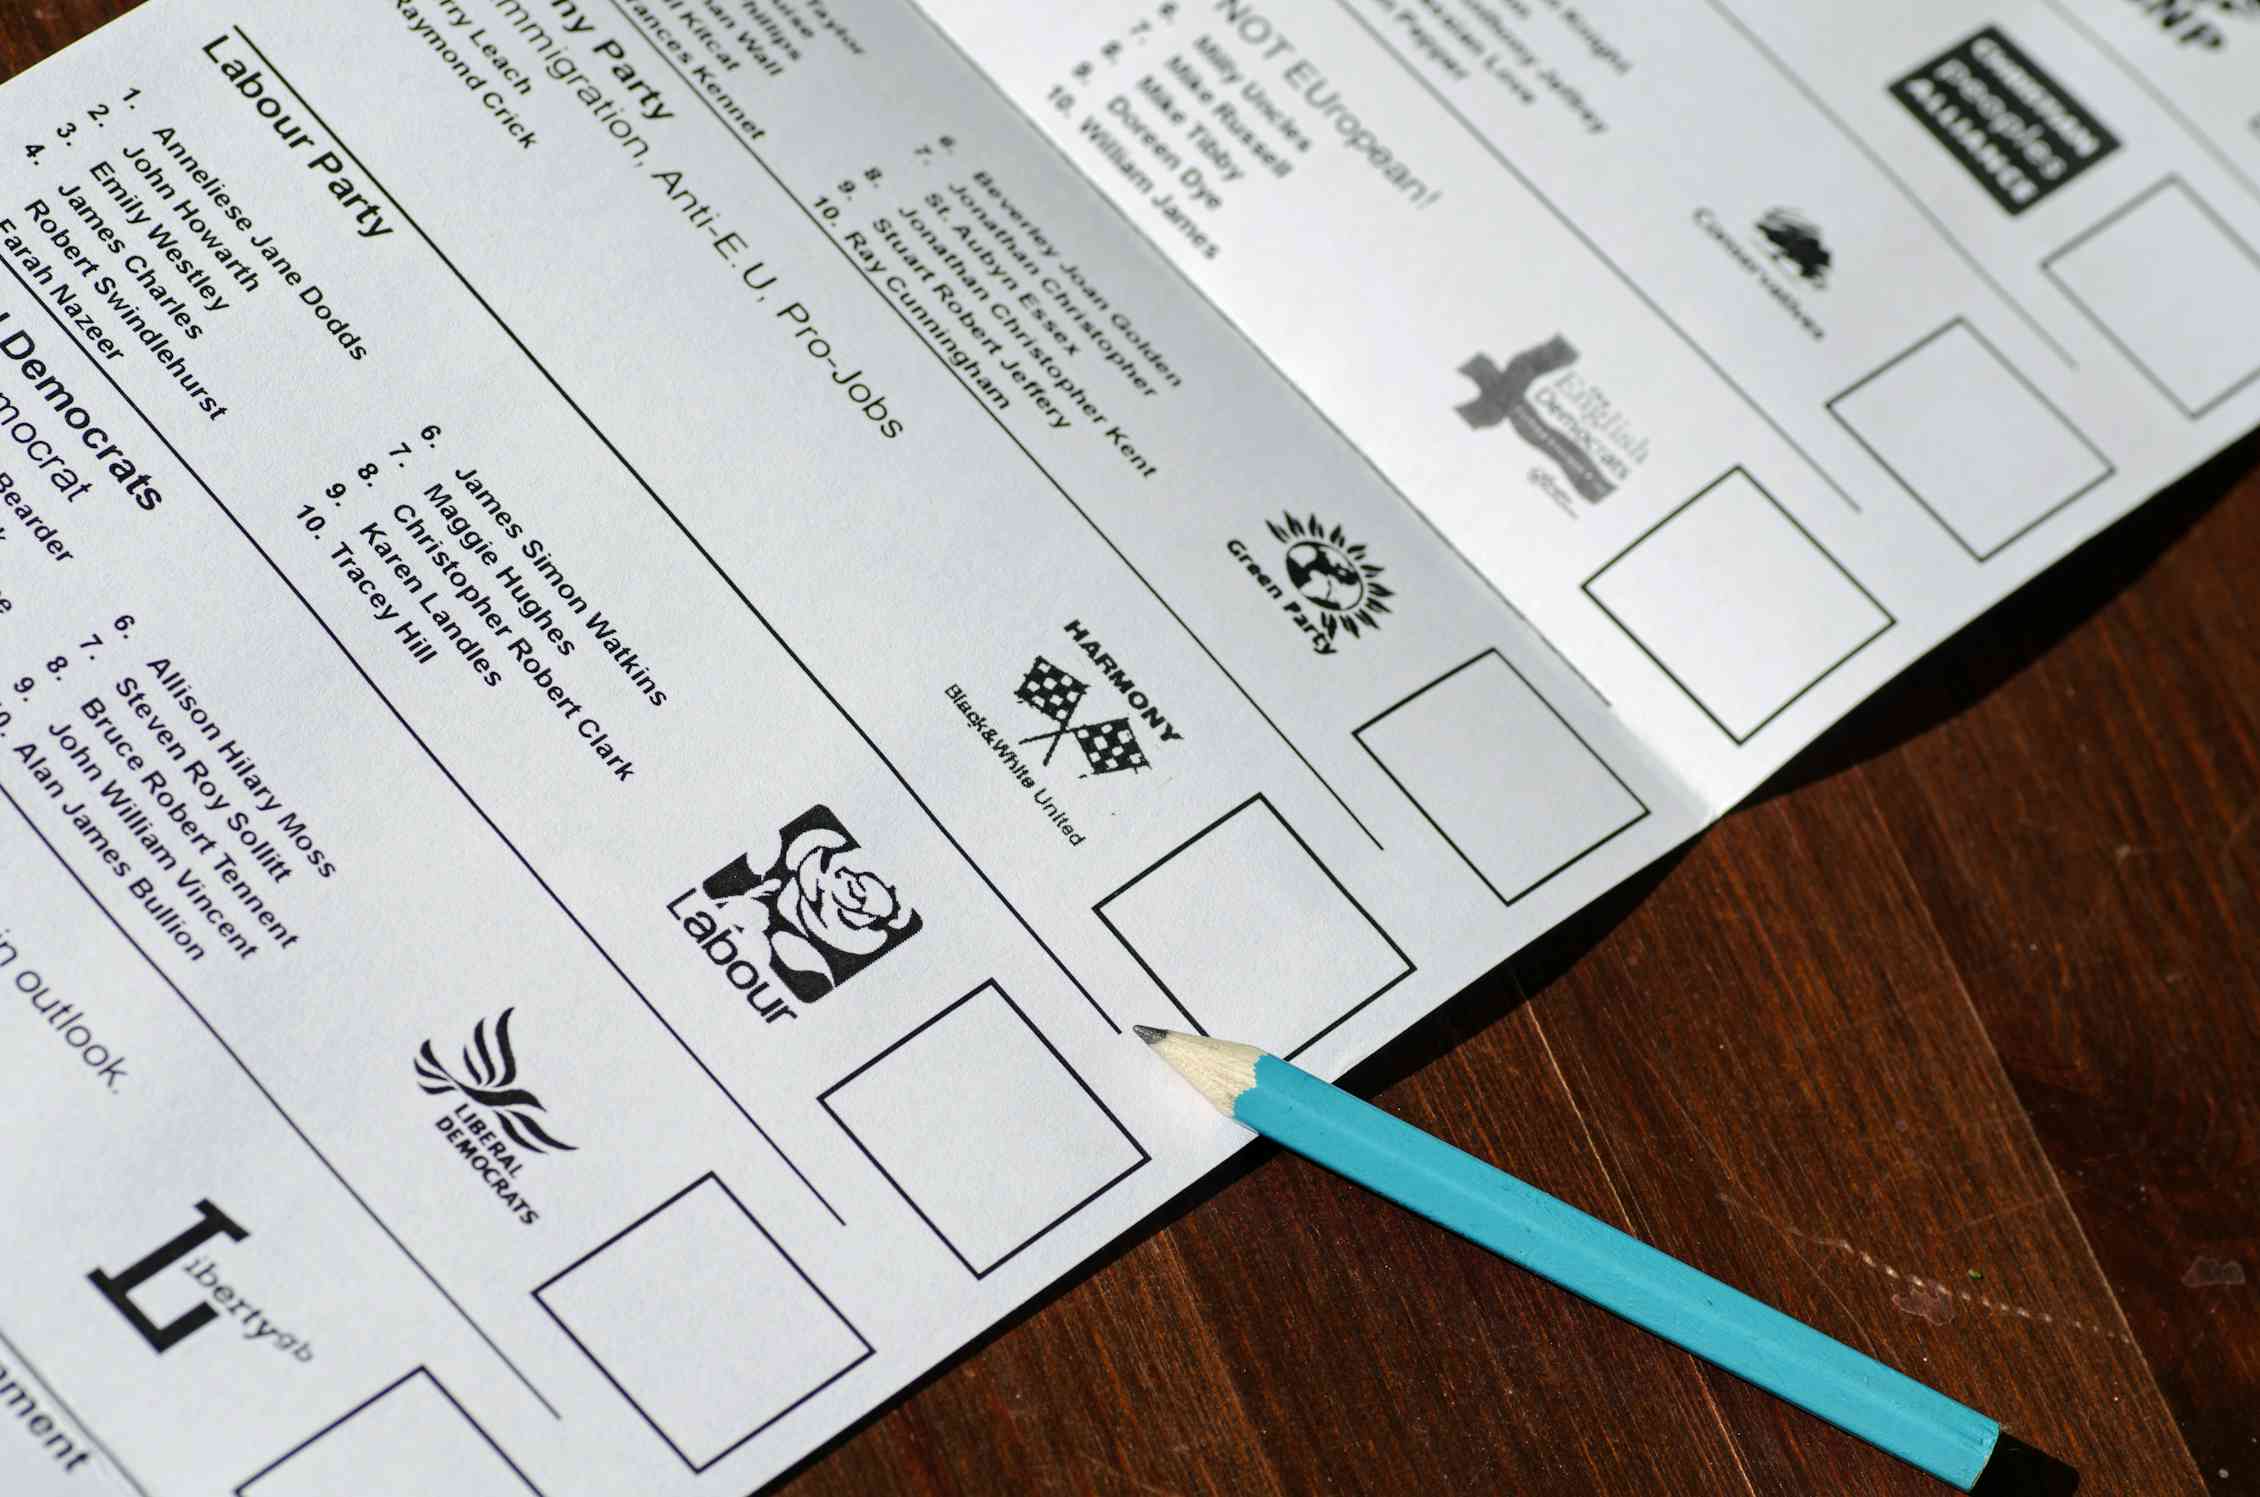 European elections guide what's actually on the ballot paper?